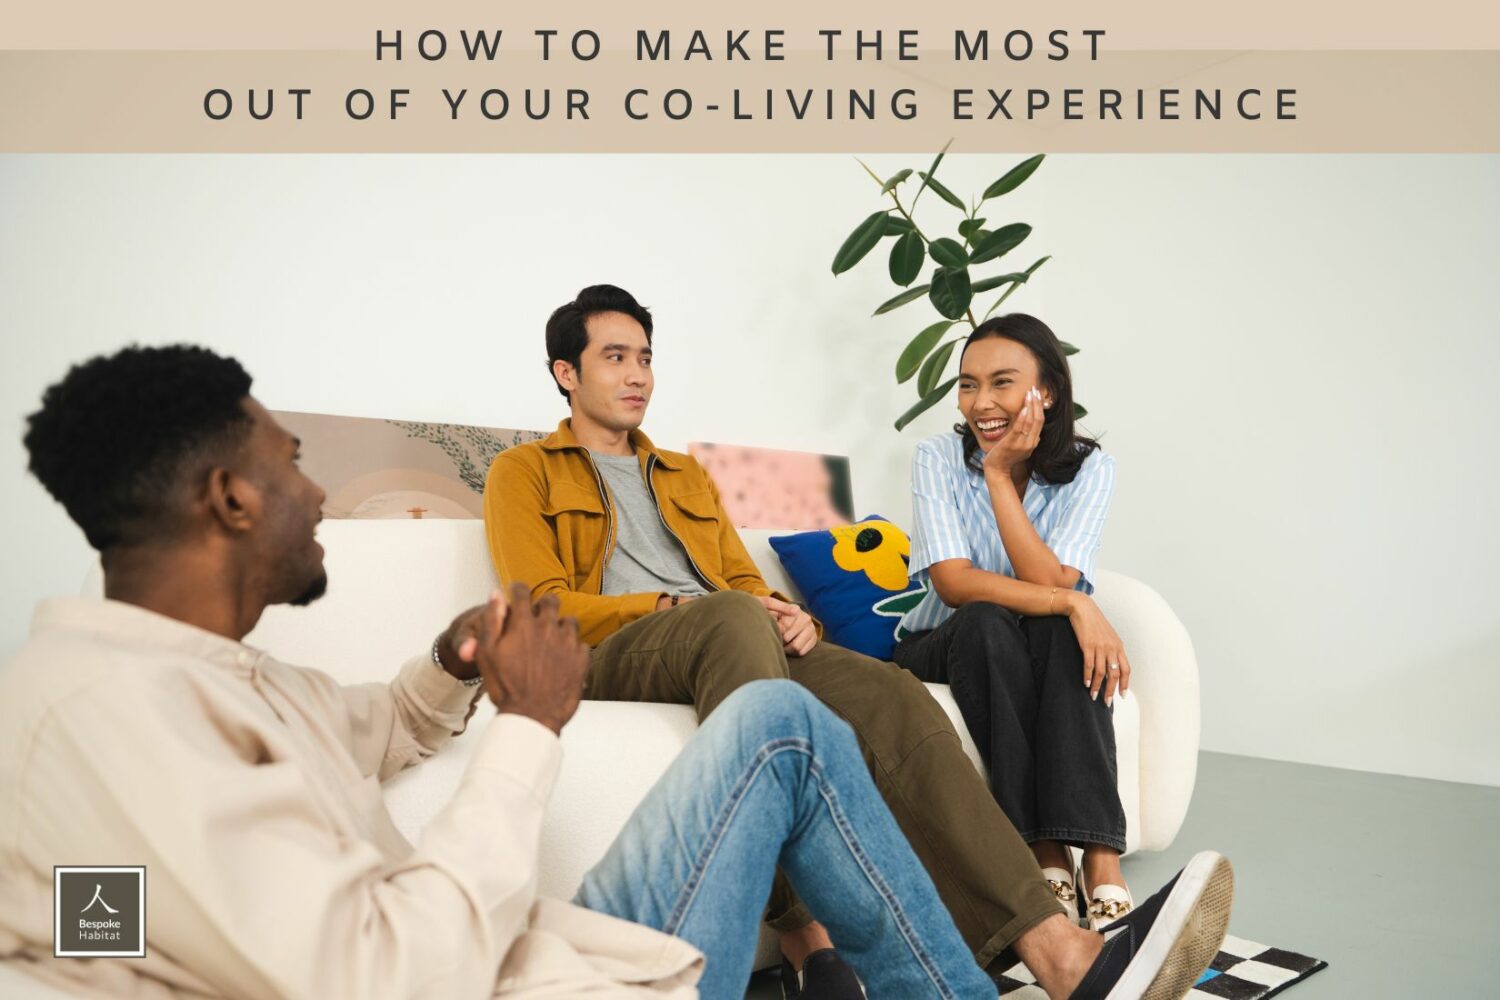 How to Make the Most Out of Your Co-living Experience